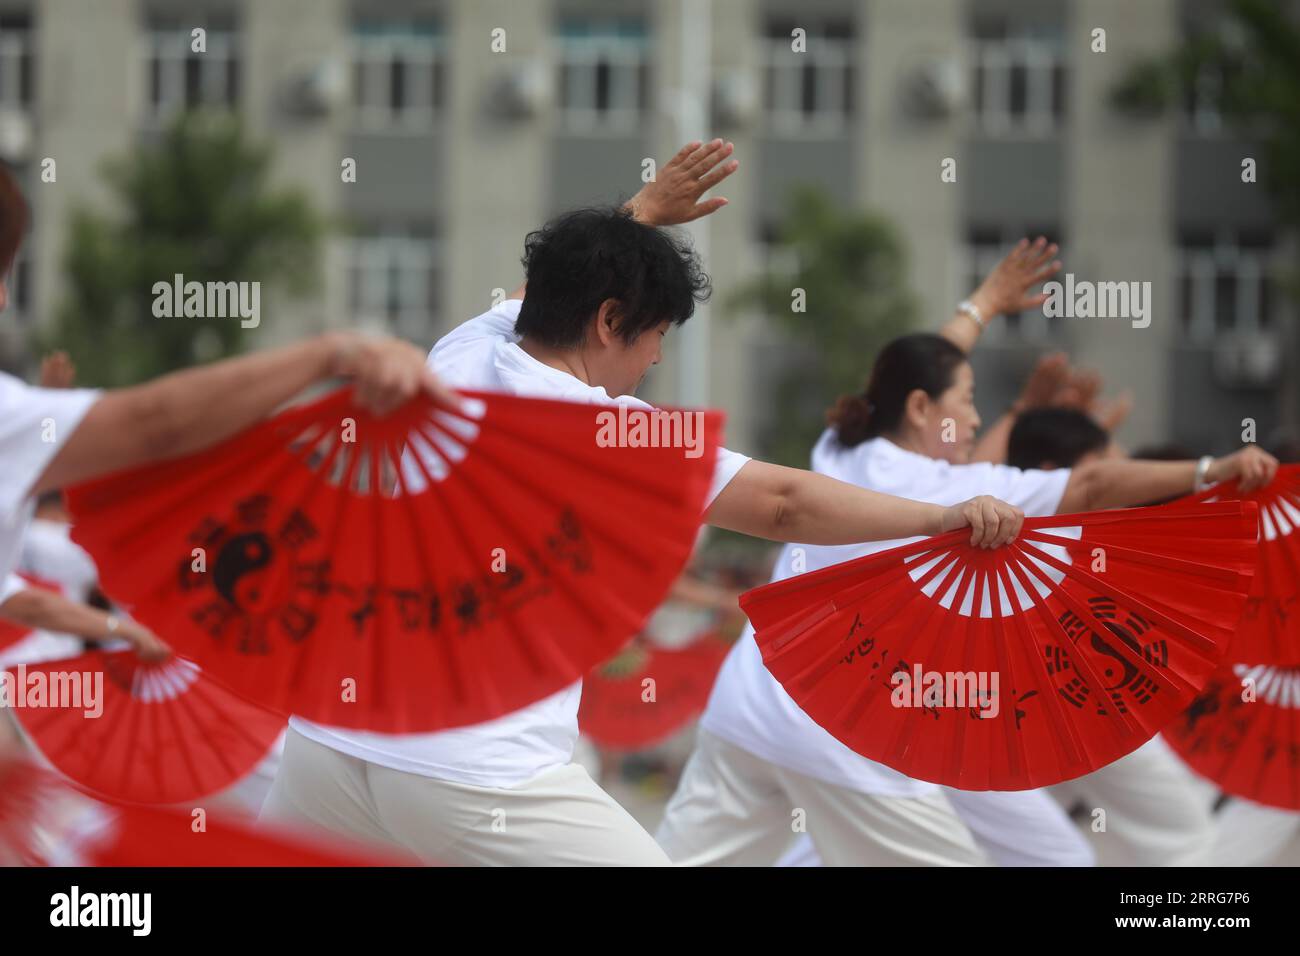 LUANNAN COUNTY, Hebei Province, China - August 8, 2020: People are practicing Tai Chi fans in the square Stock Photo